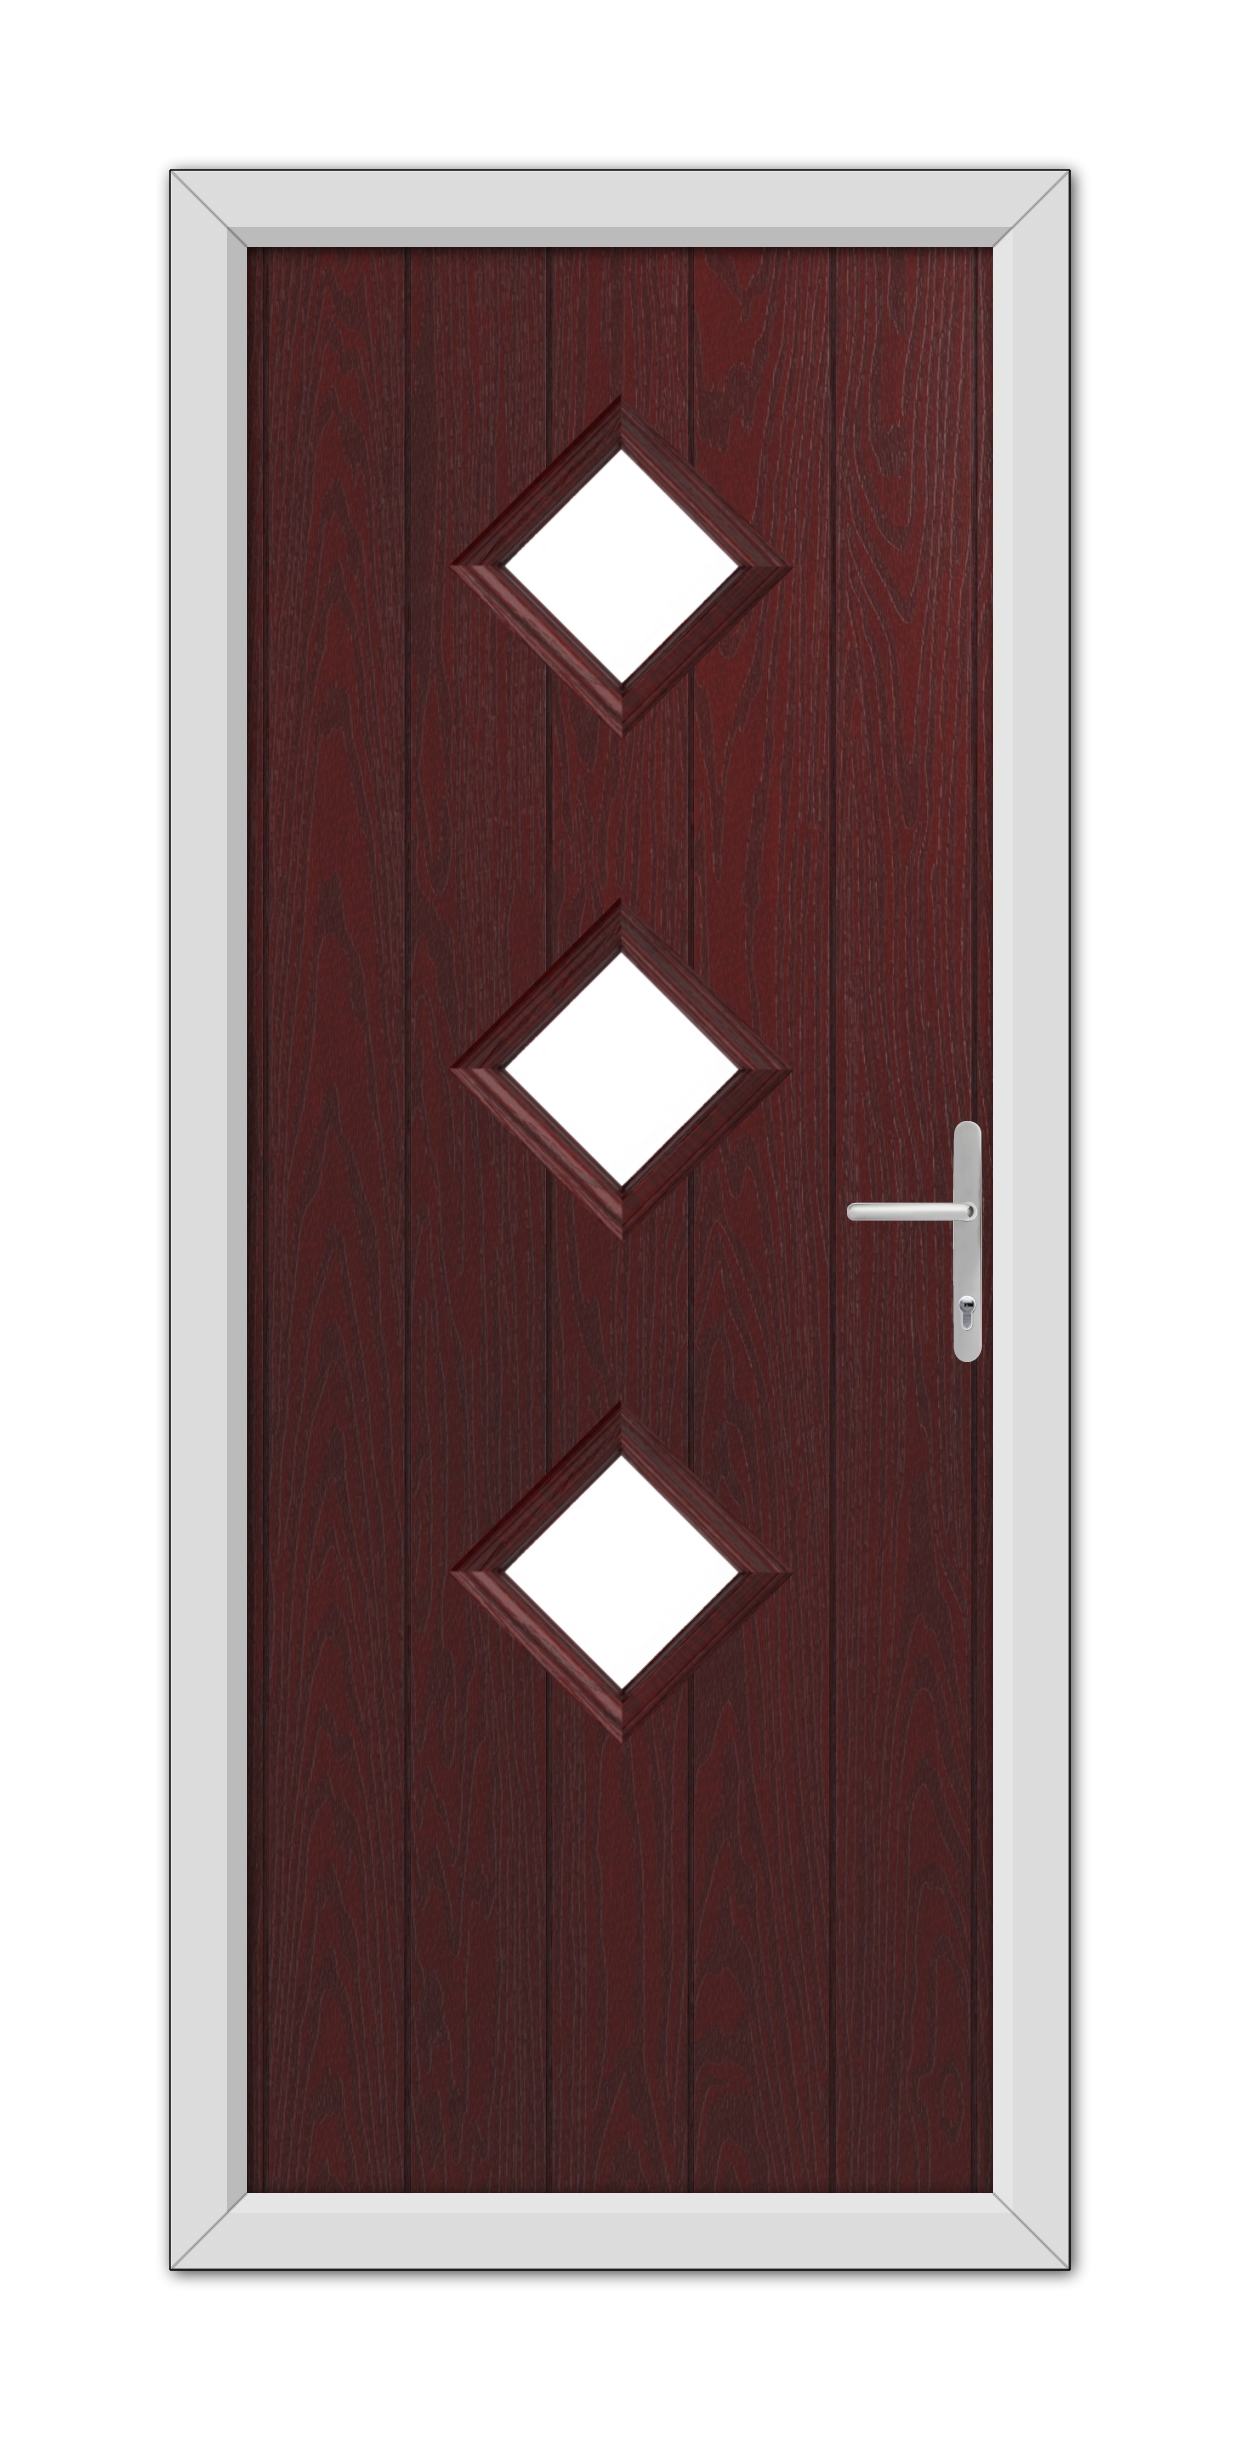 A Rosewood Richmond Composite Door 48mm Timber Core with three square glass windows and a silver handle, set within a white frame.